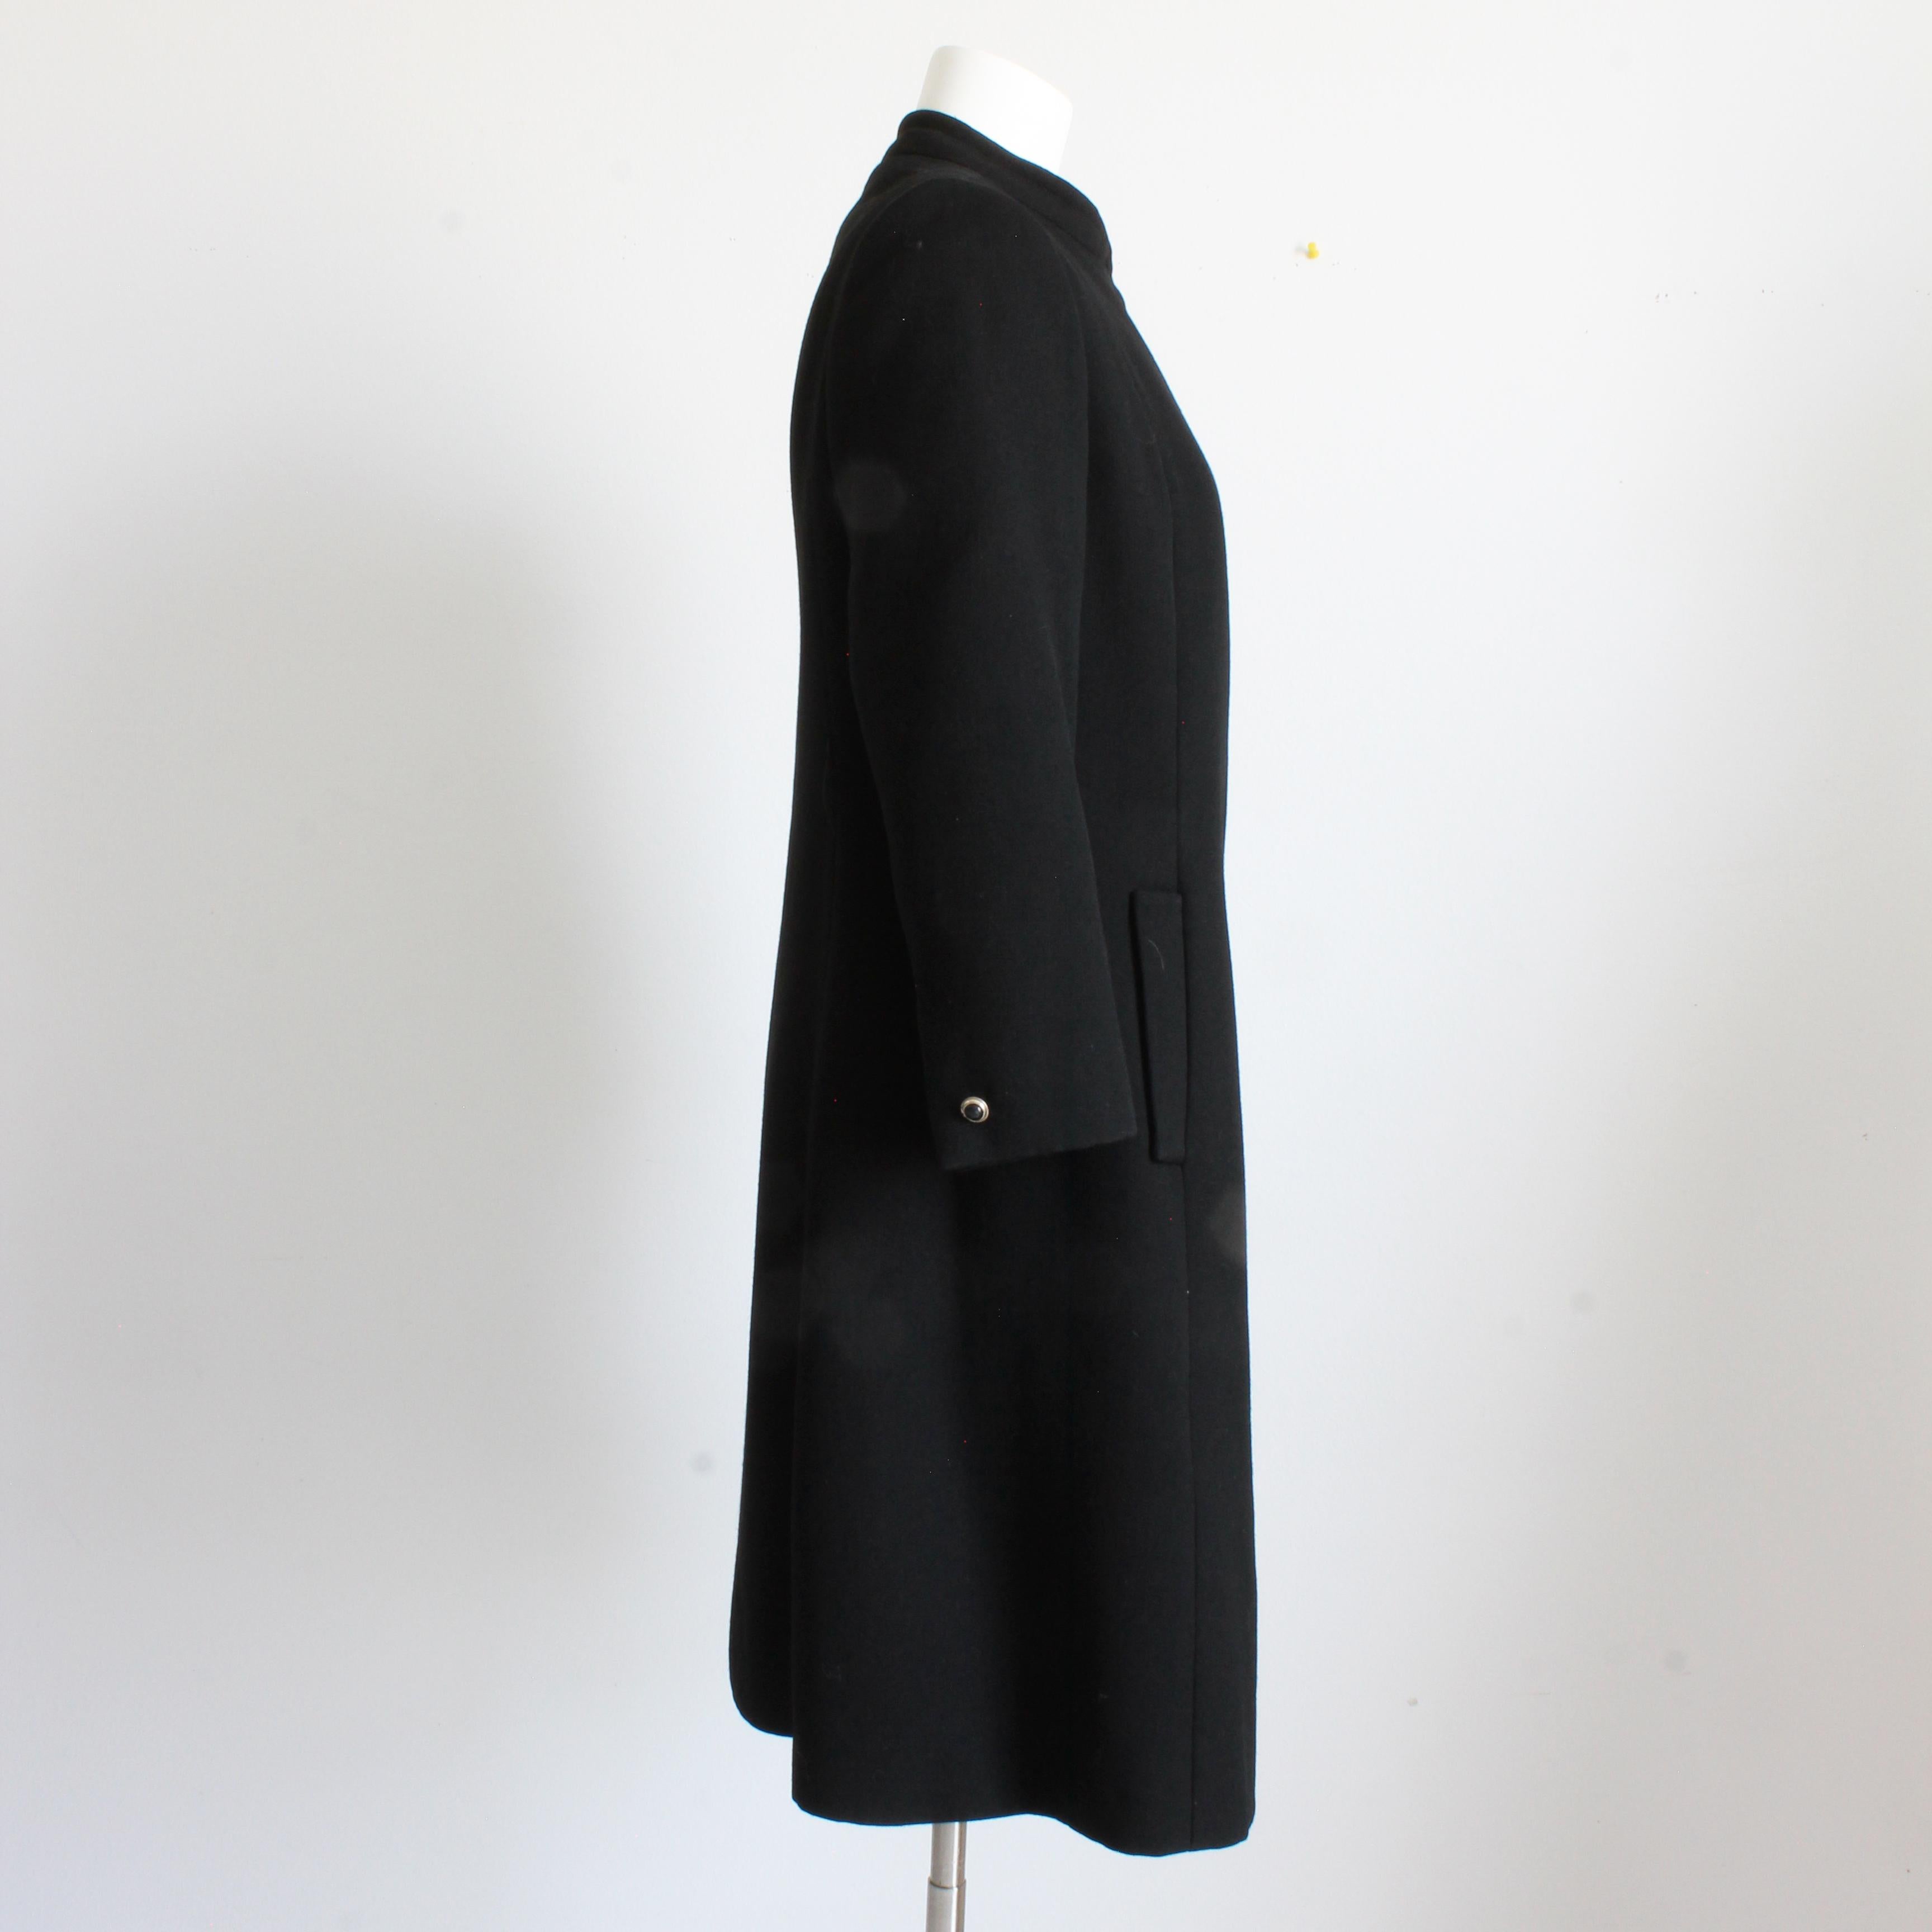 Black 50s Wool Coat by Zelinka Matlick Military Style Tailored Sculptural Collar Rare For Sale